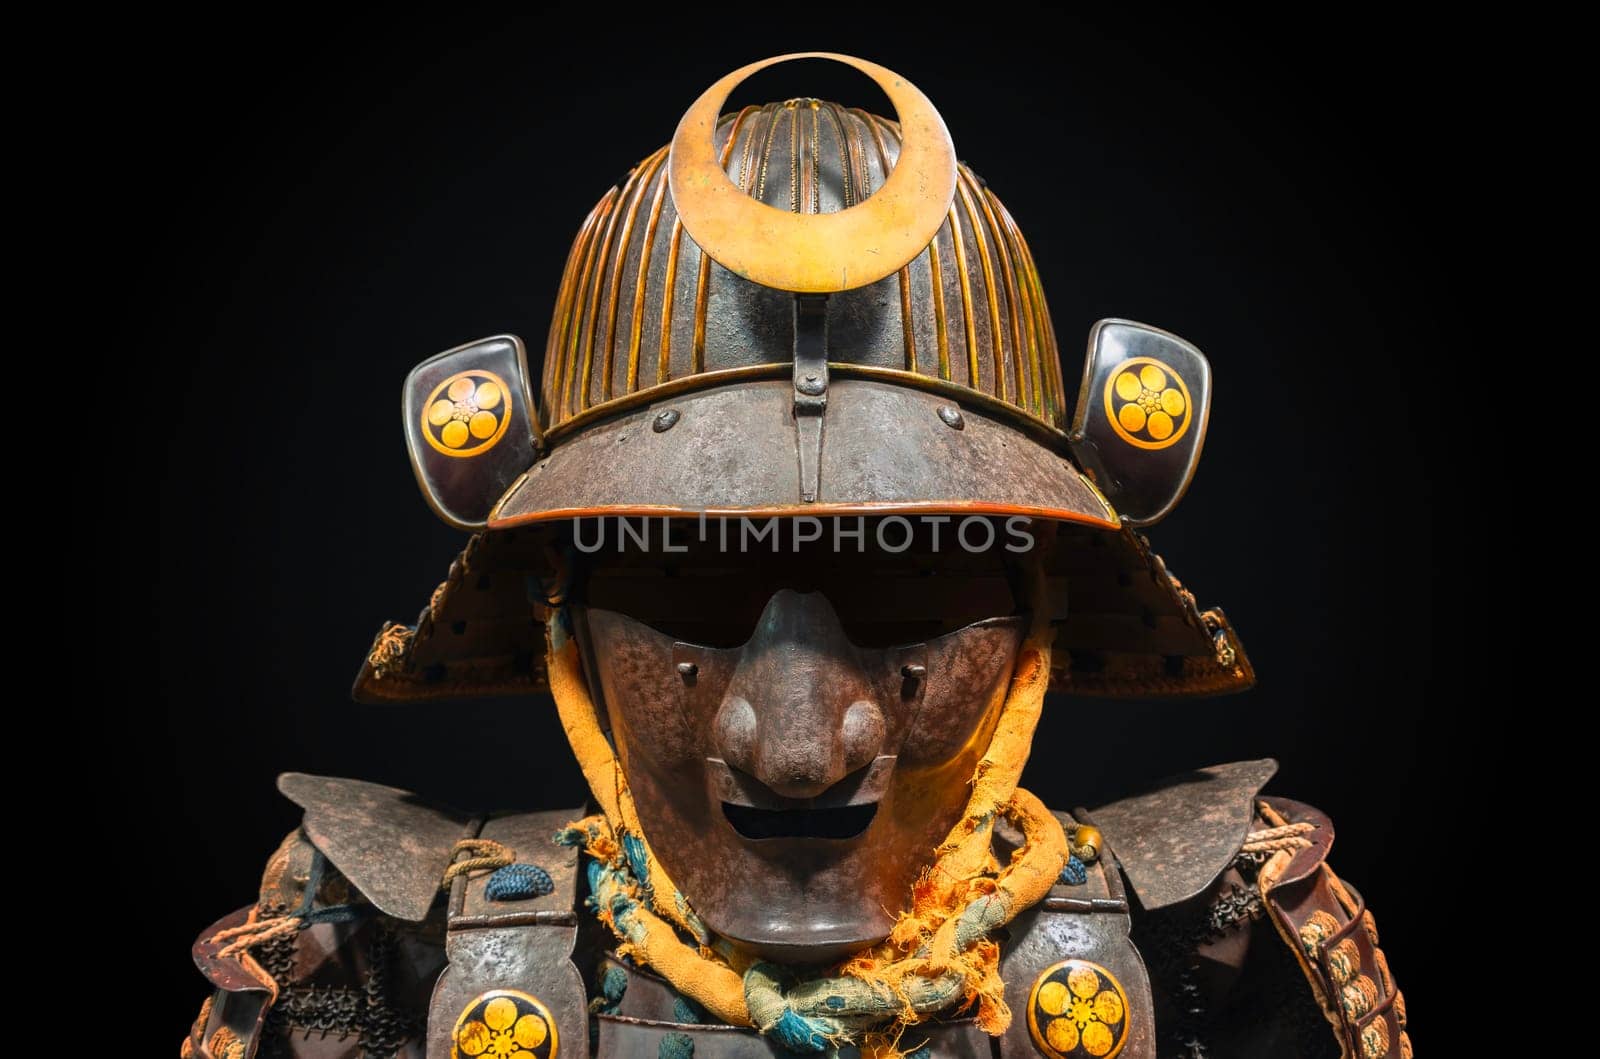 Japanese Kabuto helmet featuring facial armor safeguarding face embellished with golden maru-ni-umebachi plum crests paired with a haramaki-style armor laced with threads.